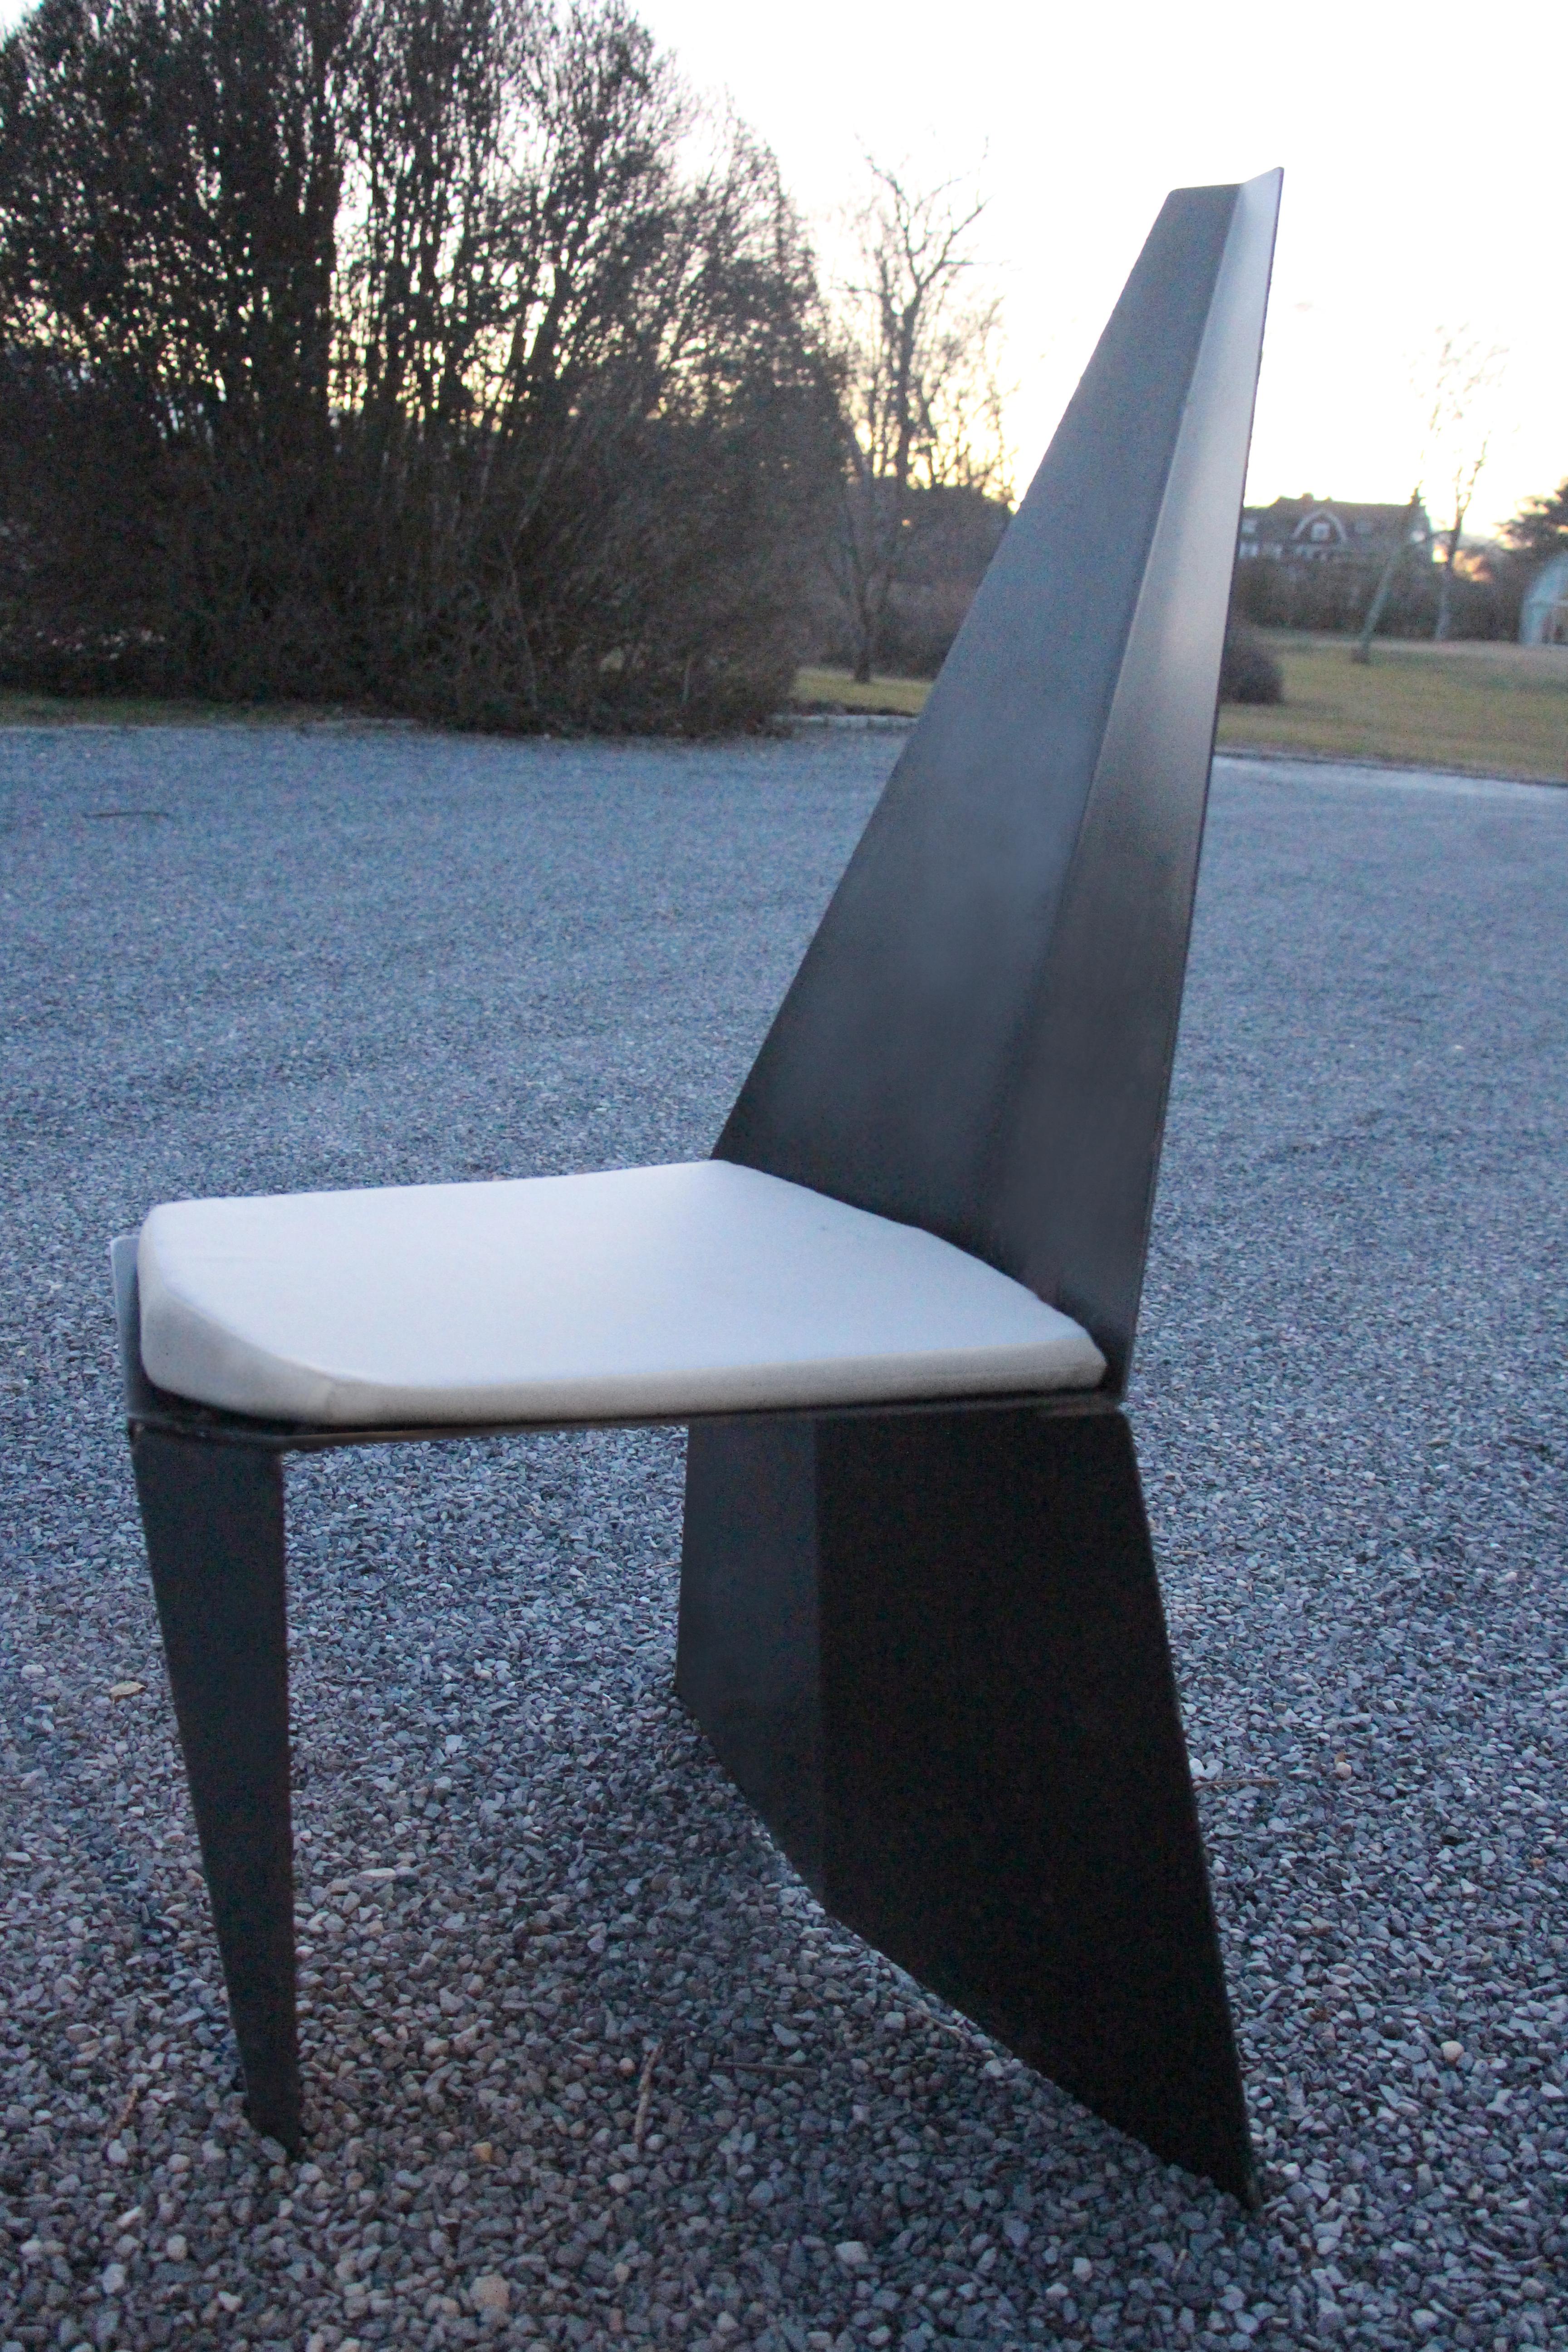 Contemporary Indoor/Outdoor Crystallized Chair in Recycled Metal, Minimal Style For Sale 11